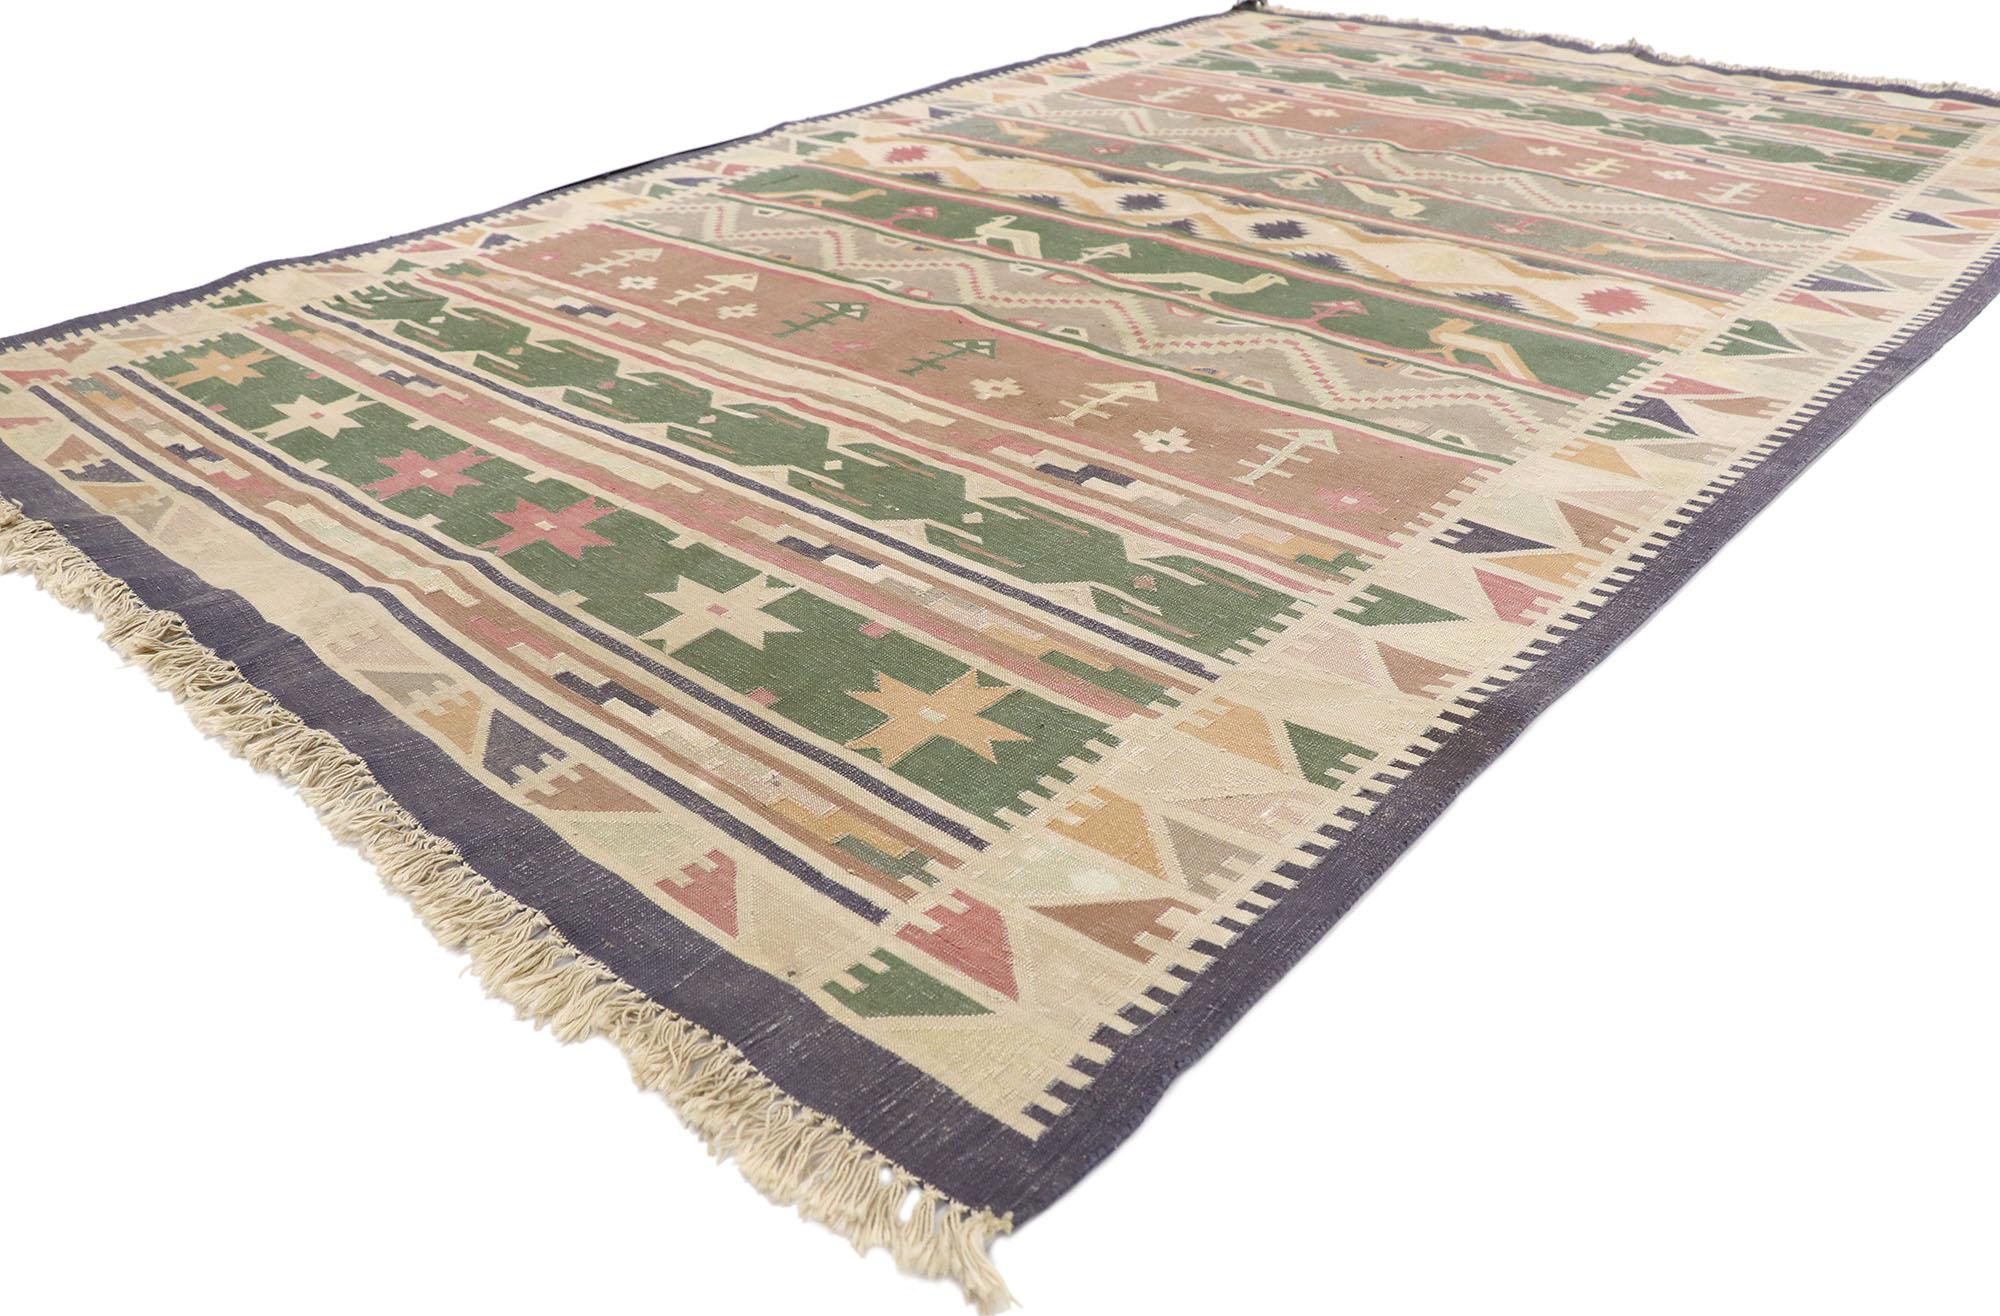 77985 vintage Indian stone wash Dhurrie rug with Folk Art style 05'05 x 08'07.?? Full of tiny details and a bold expressive design combined with with warm earth-tone colors and folk art tribal style, this hand-woven wool vintage Indian stone washed